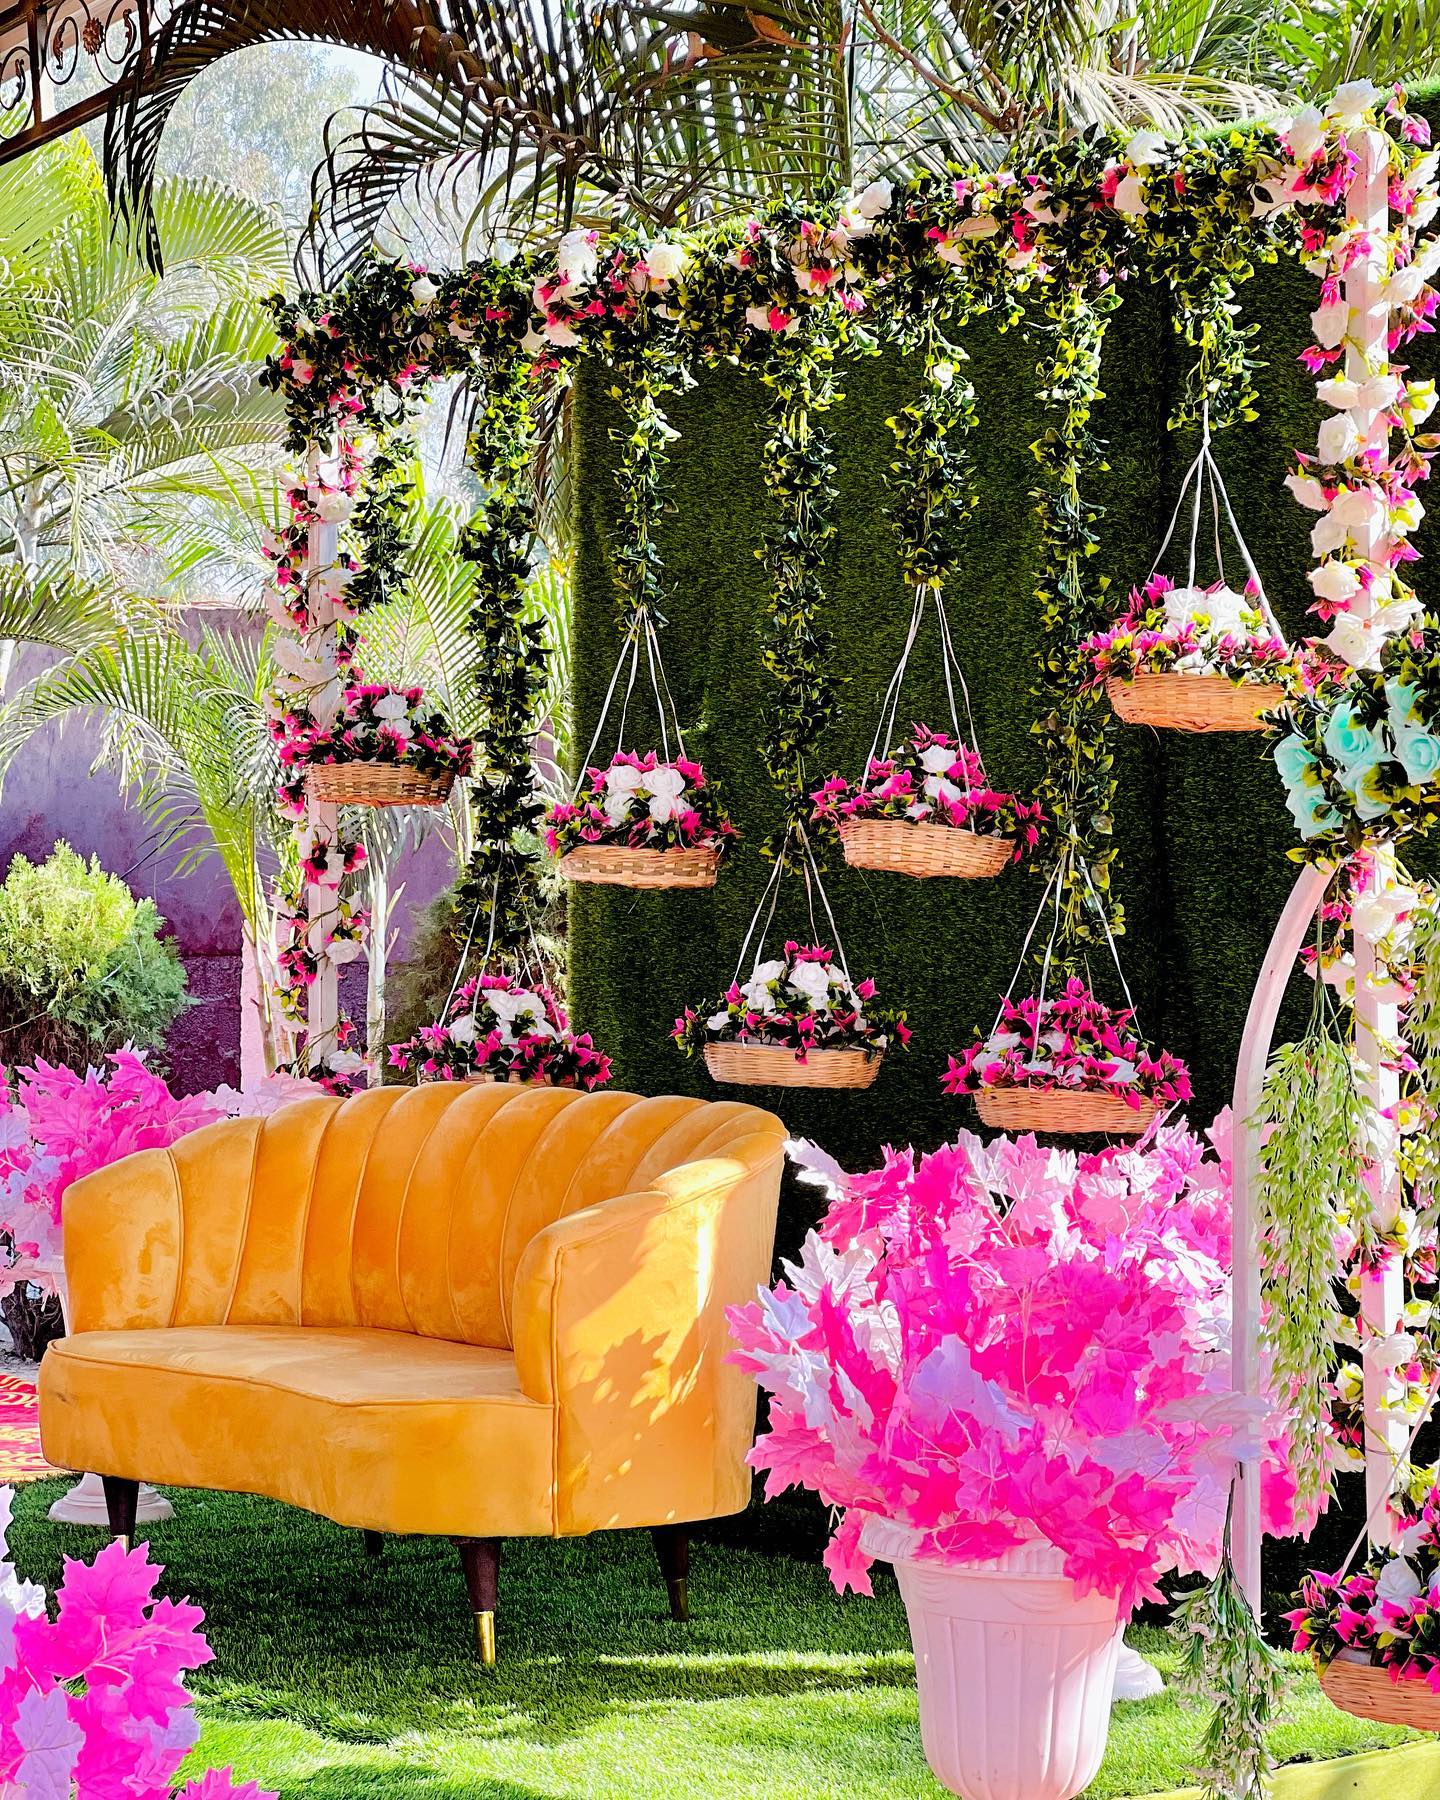 flower basket decoration for haldi backdrop with pink and white blooms